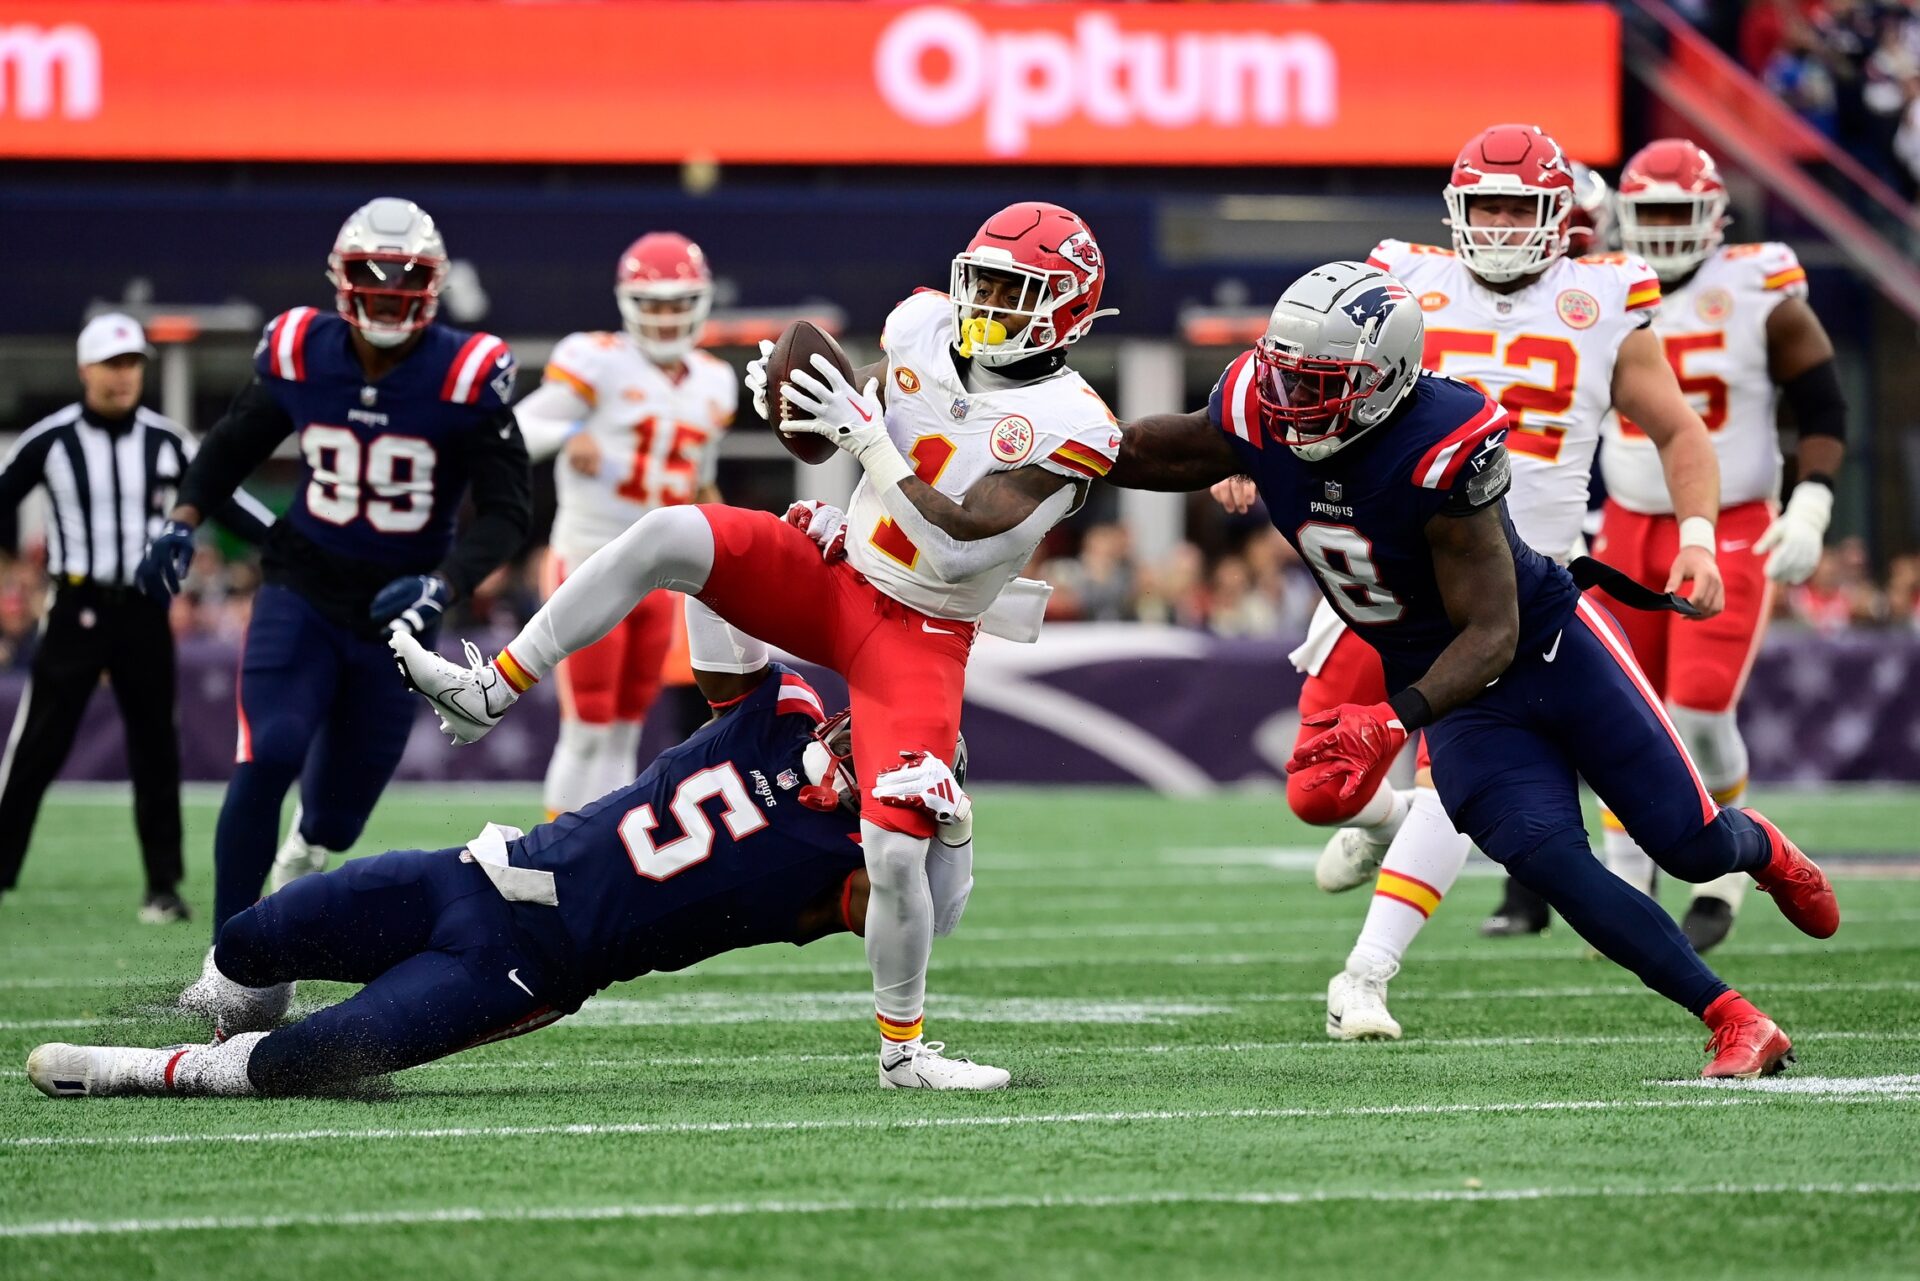 Kansas City Chiefs running back Jerick McKinnon (1) gets tackled by New England Patriots safety Jabrill Peppers (5) during the first half at Gillette Stadium.